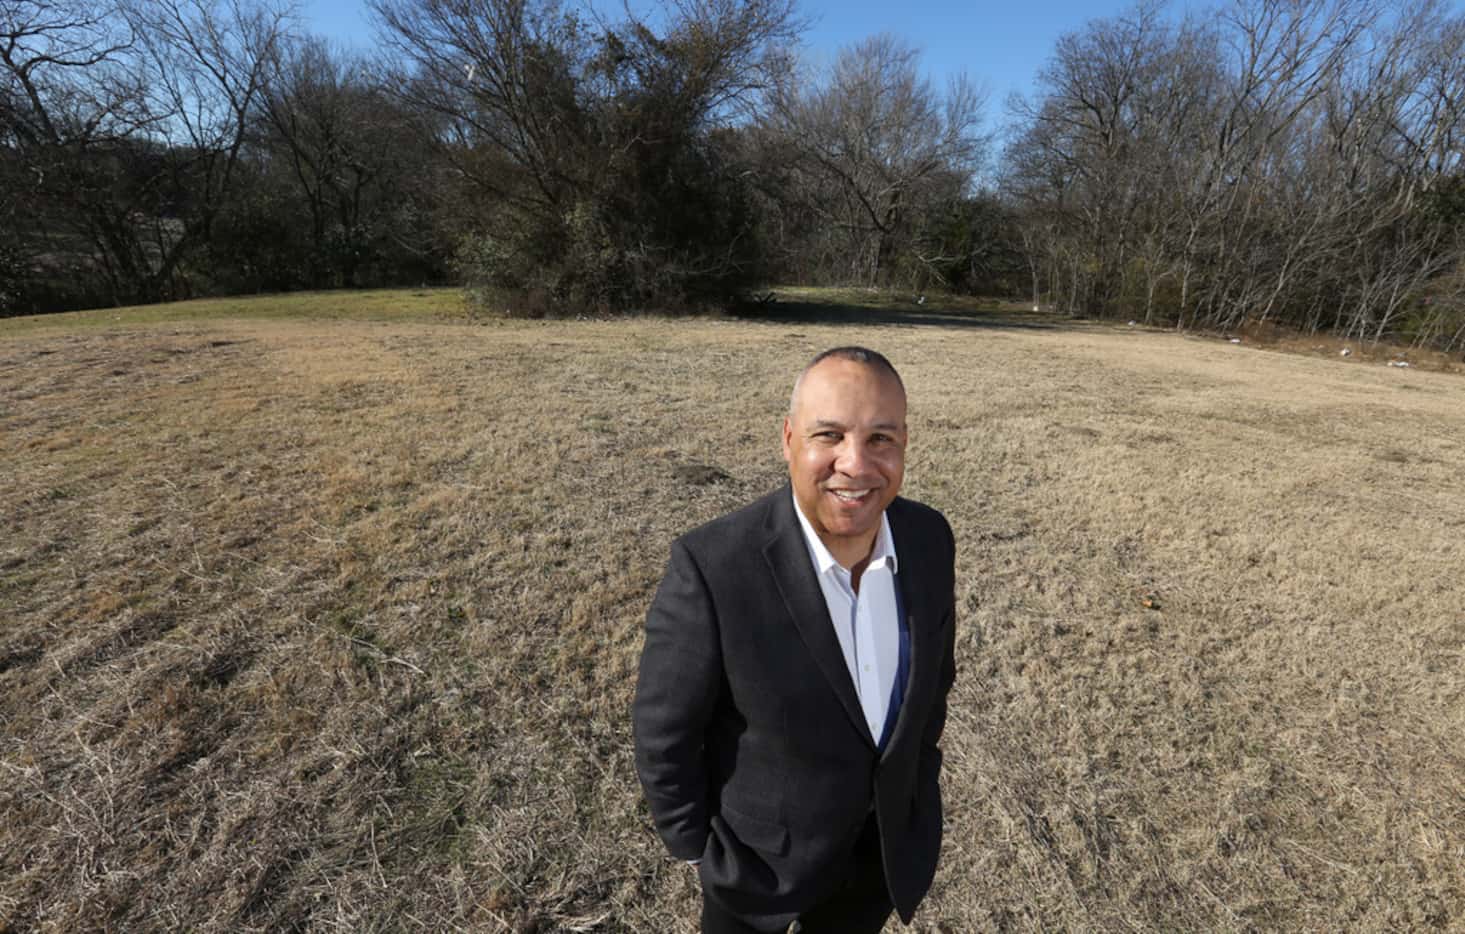 Local businessman Randy Bowman plans to build several dormitories on a vacant lot at 405 E....